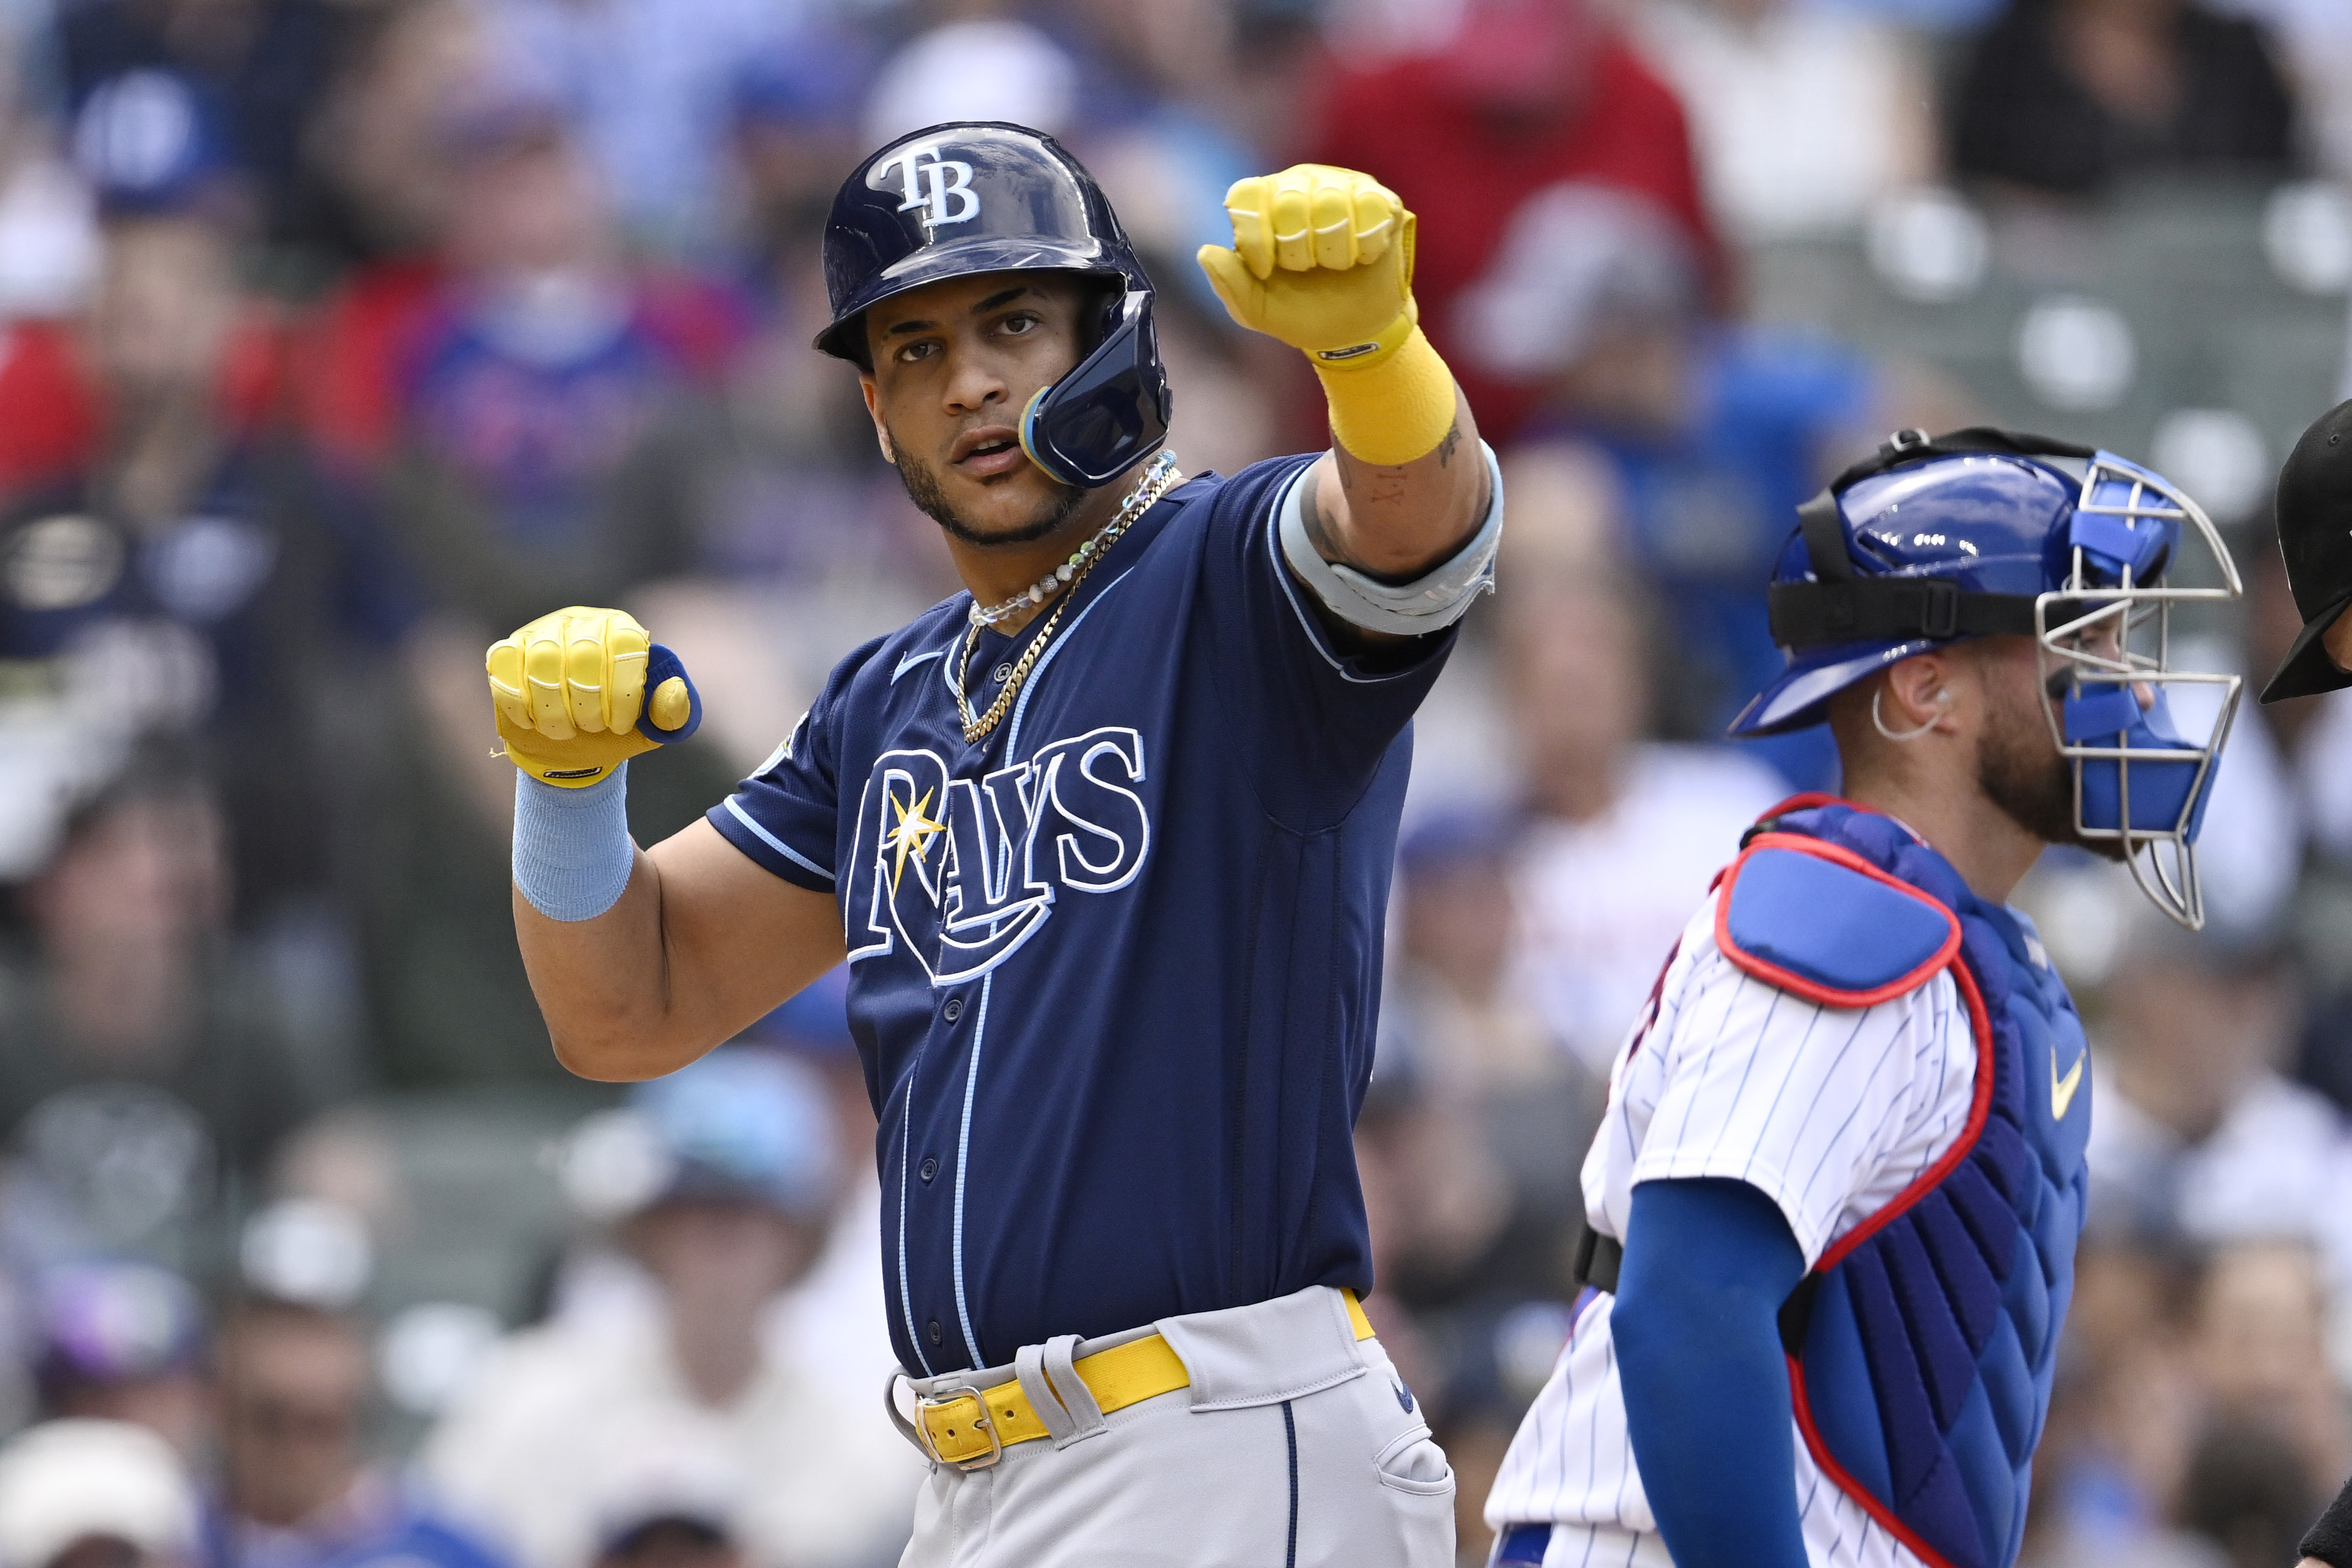 Rays find some power late, beat Cubs to avoid sweep